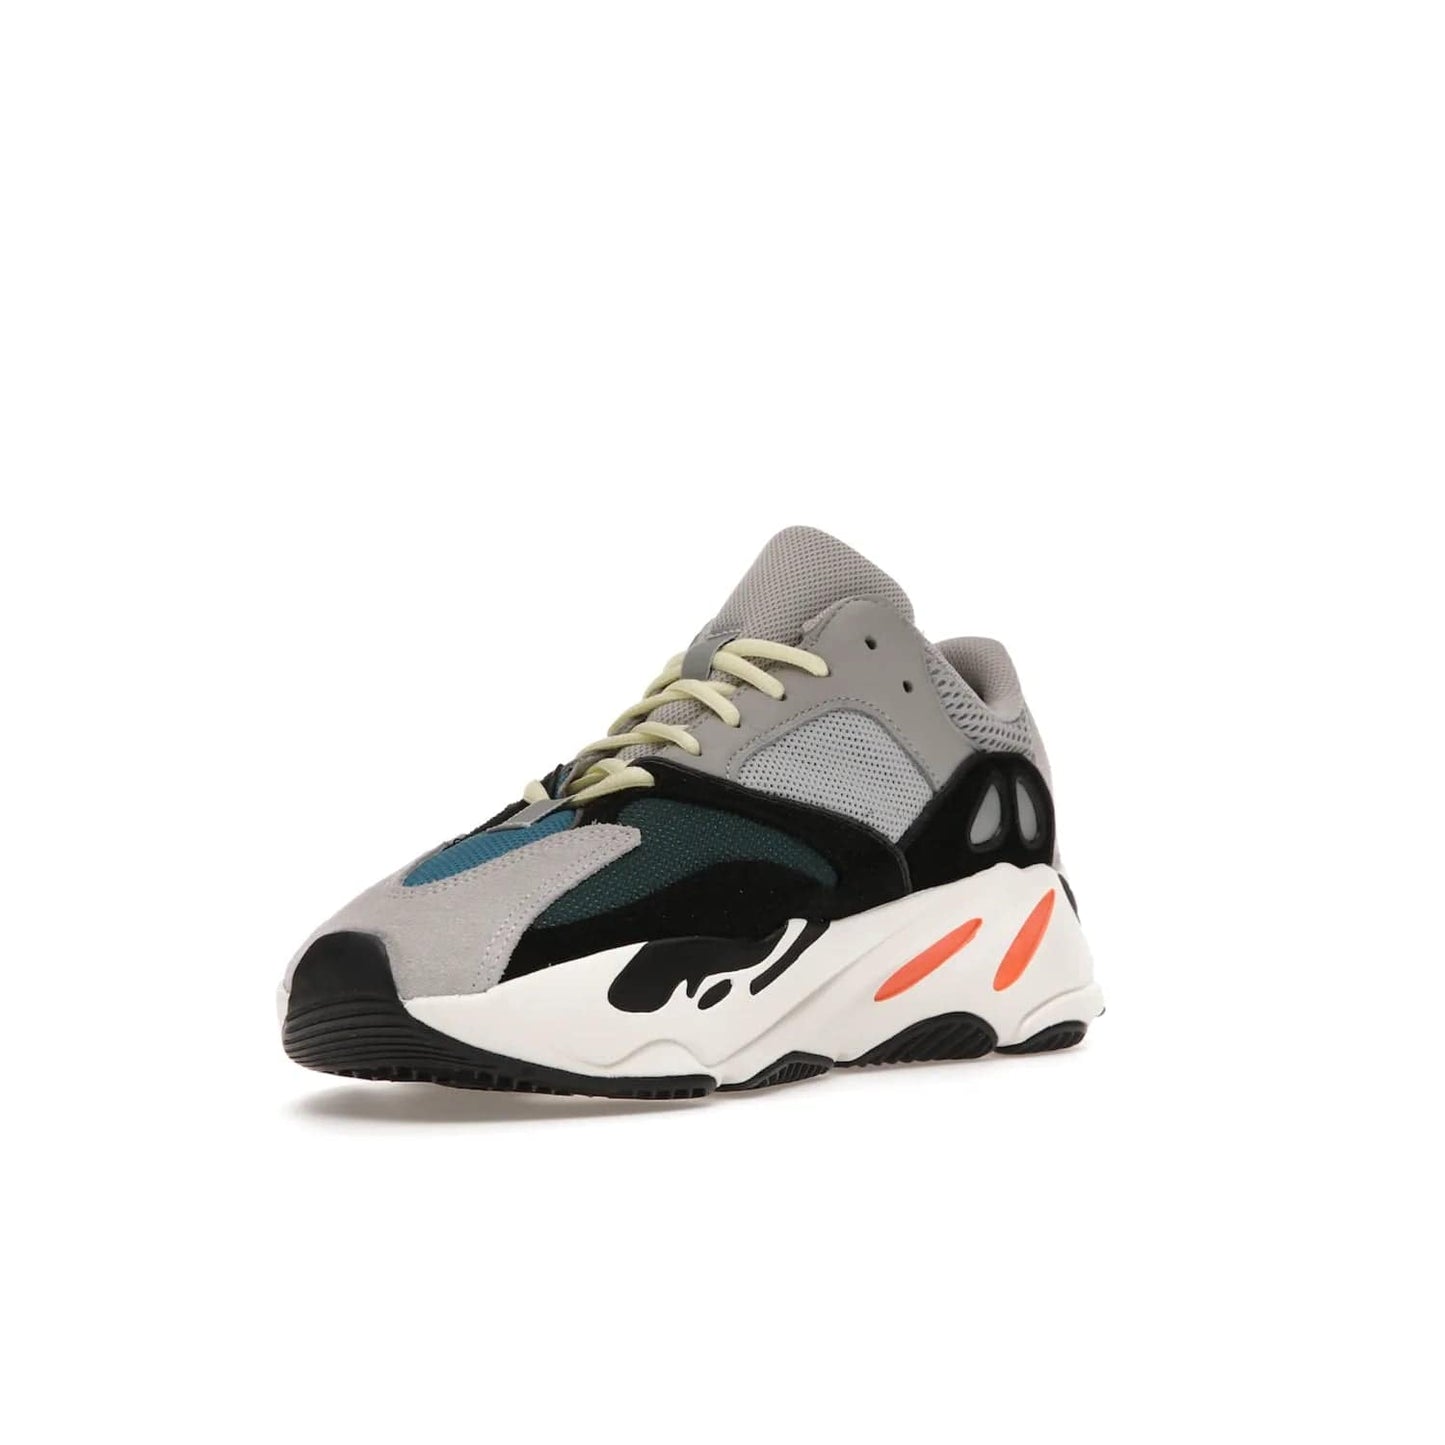 adidas Yeezy Boost 700 Wave Runner - Image 14 - Only at www.BallersClubKickz.com - Shop the iconic adidas Yeezy Boost 700 Wave Runner. Featuring grey mesh and leather upper, black suede overlays, teal mesh underlays, and signature Boost sole. Be bold & make a statement.